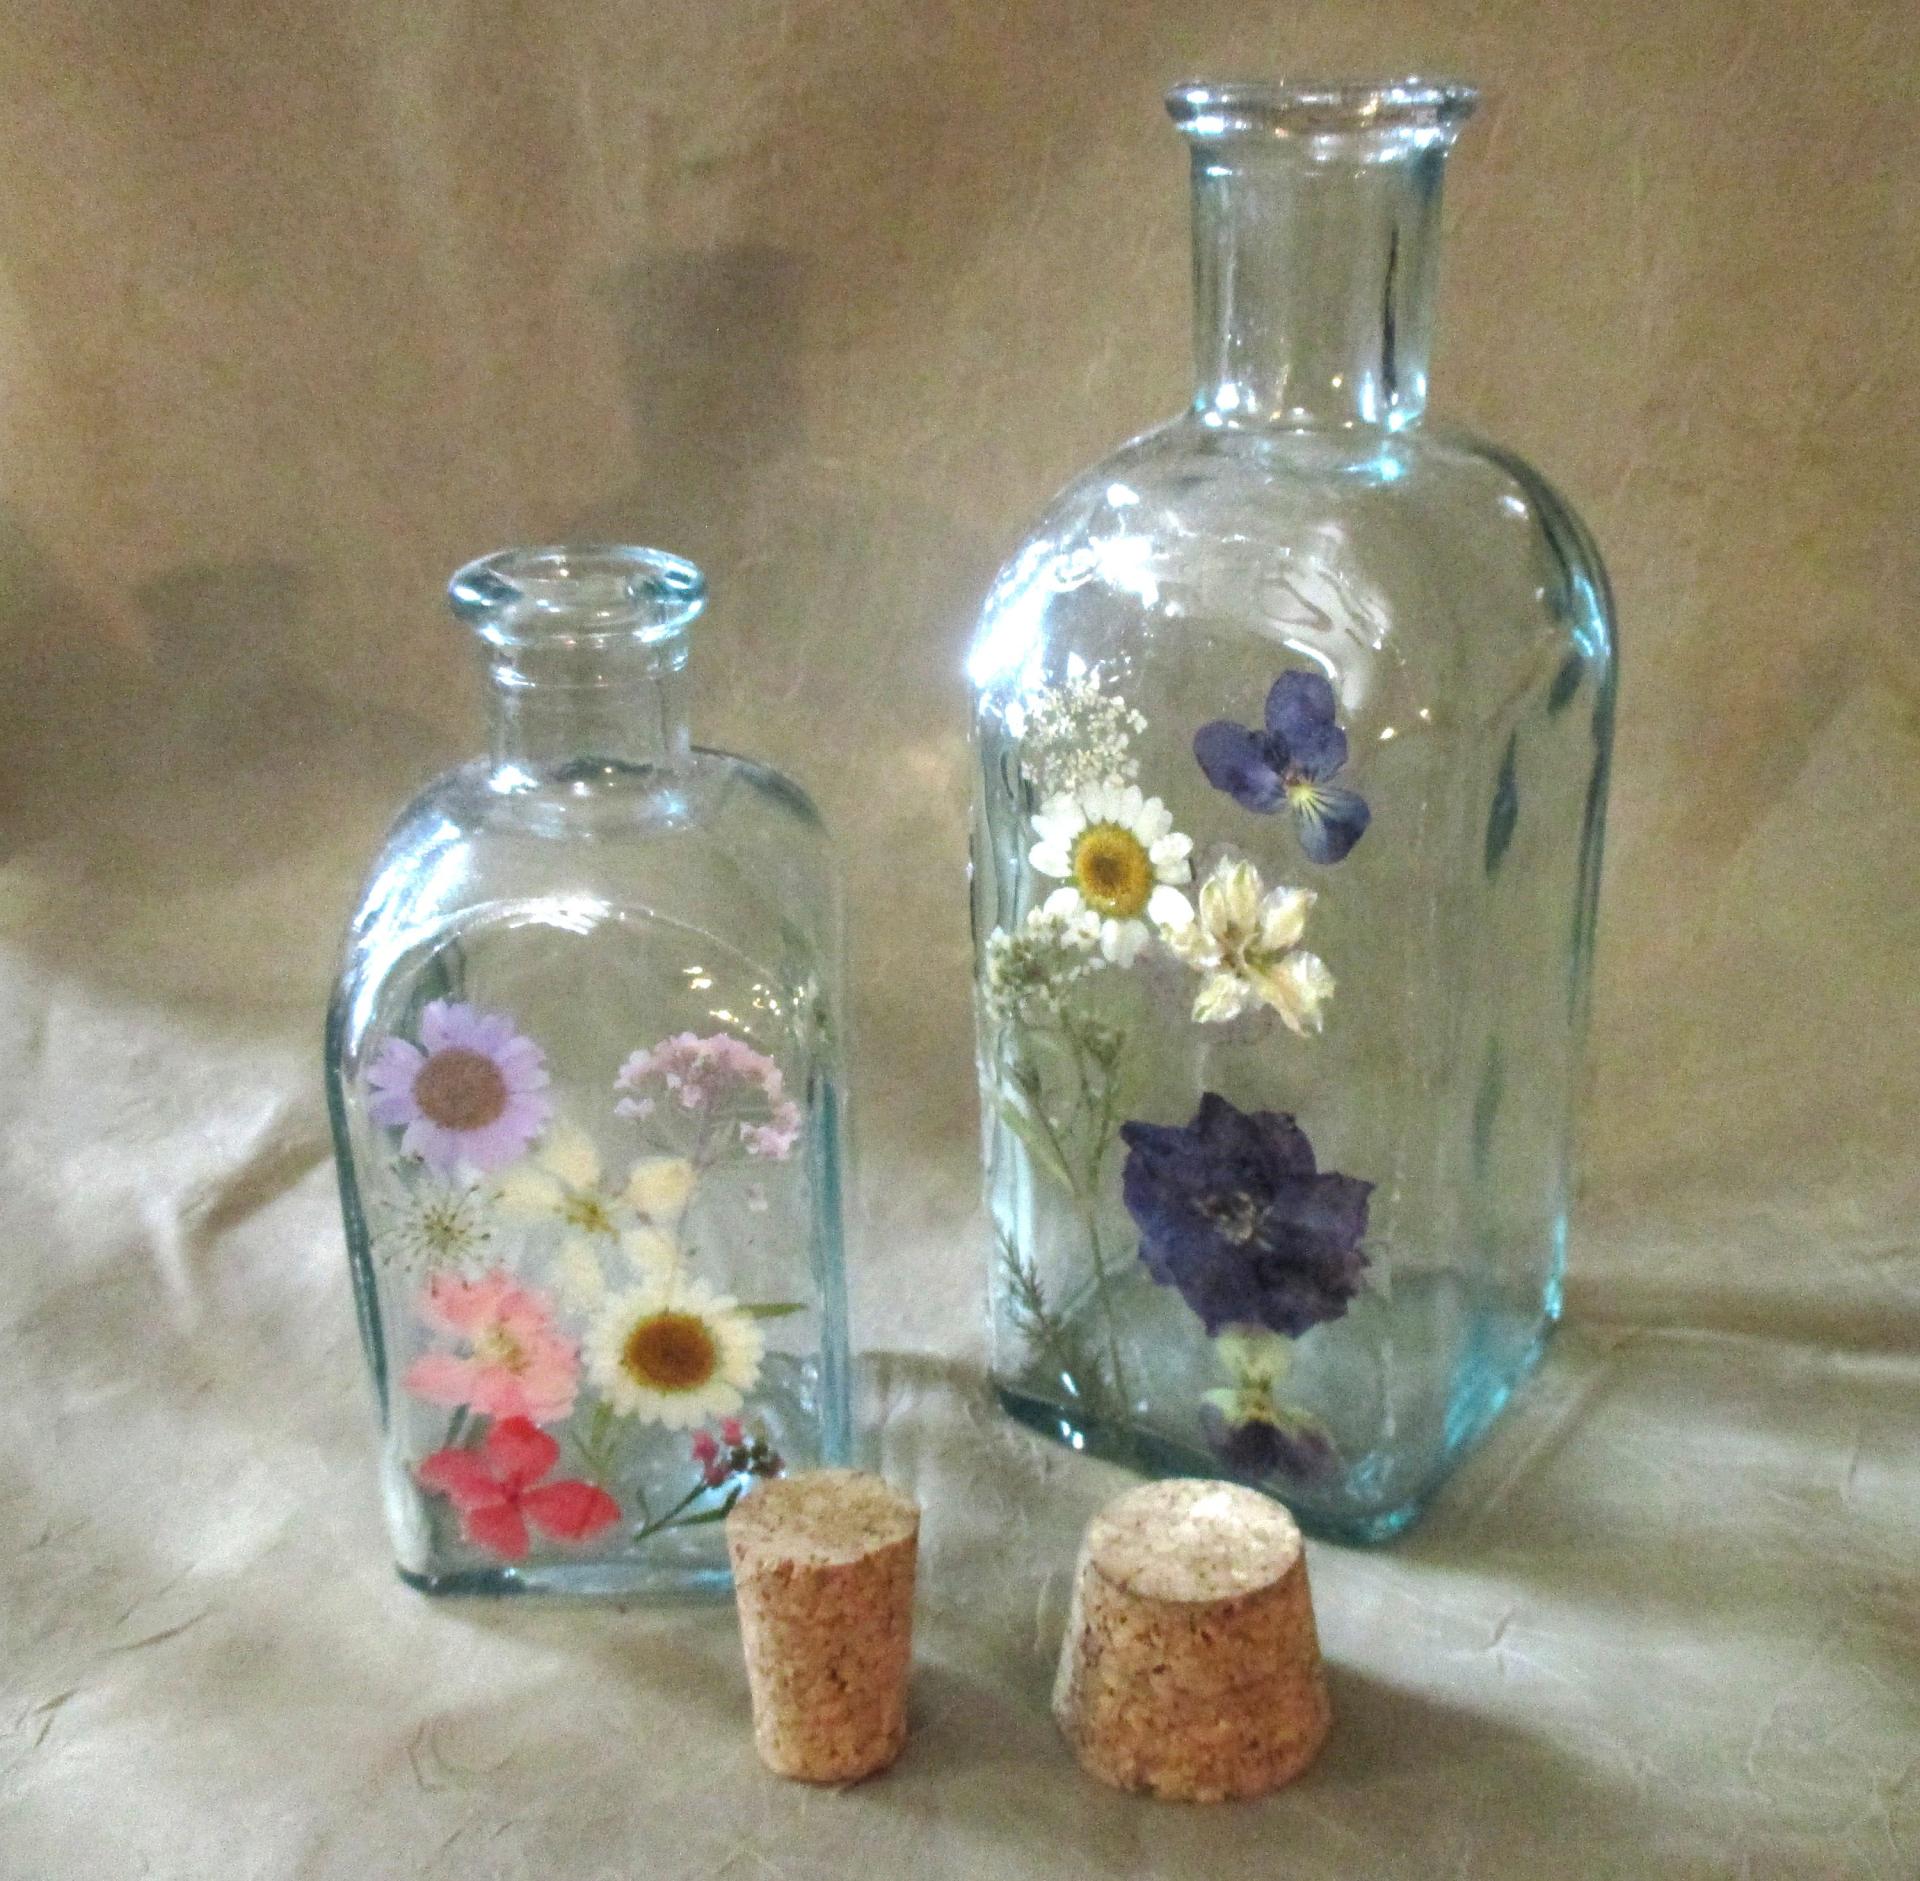 Floral Bottles, Large  Cork Jars - 8oz and 17oz - Glass Bottles with Epoxy, Flowers in Resin